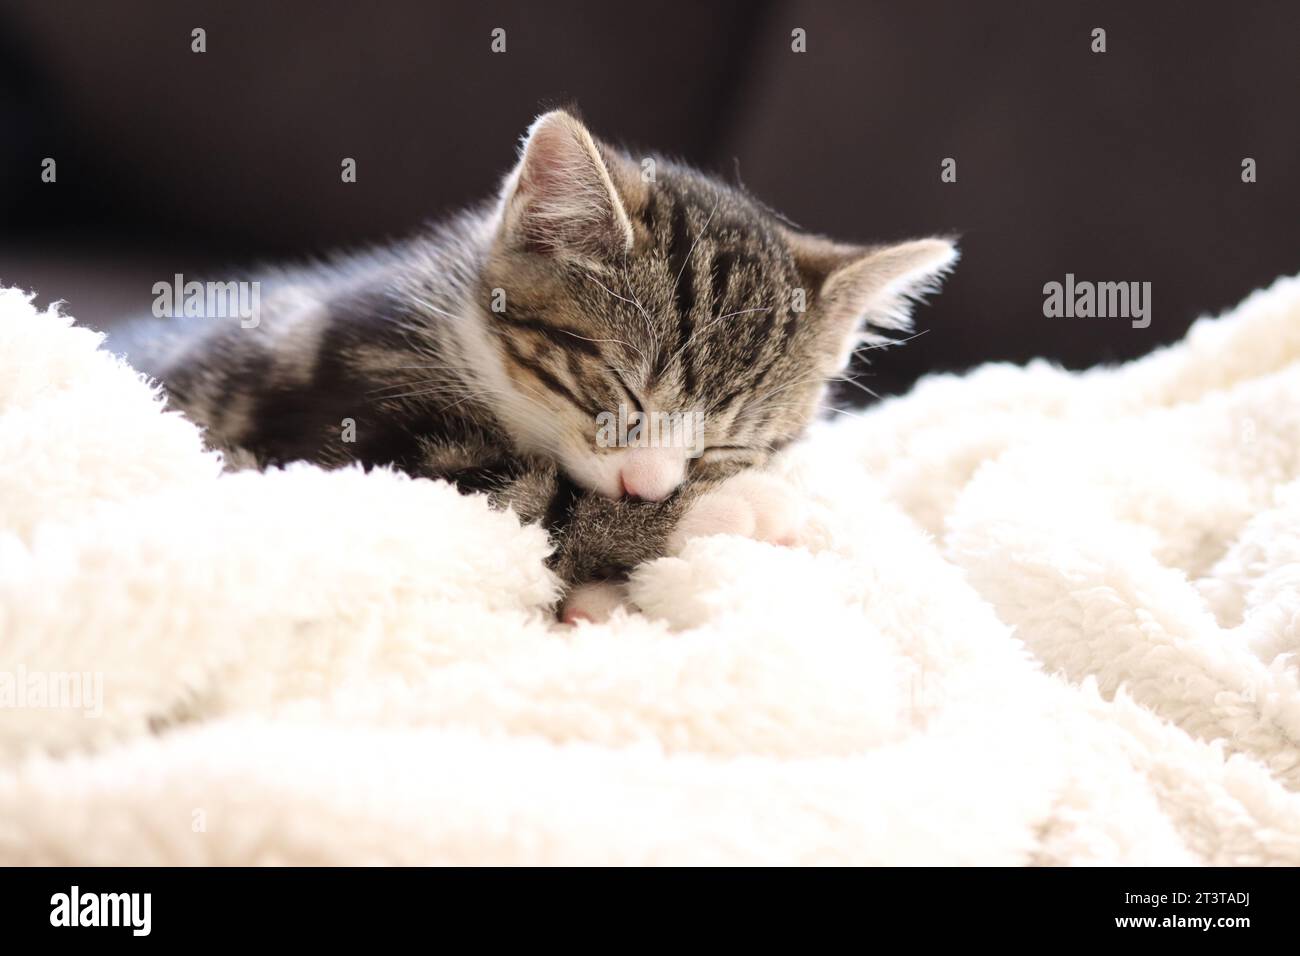 heartwarming image captures the essence of tranquility as a tiny, adorable kitten peacefully slumbers. The soft, innocent face of the kitten radiates Stock Photo